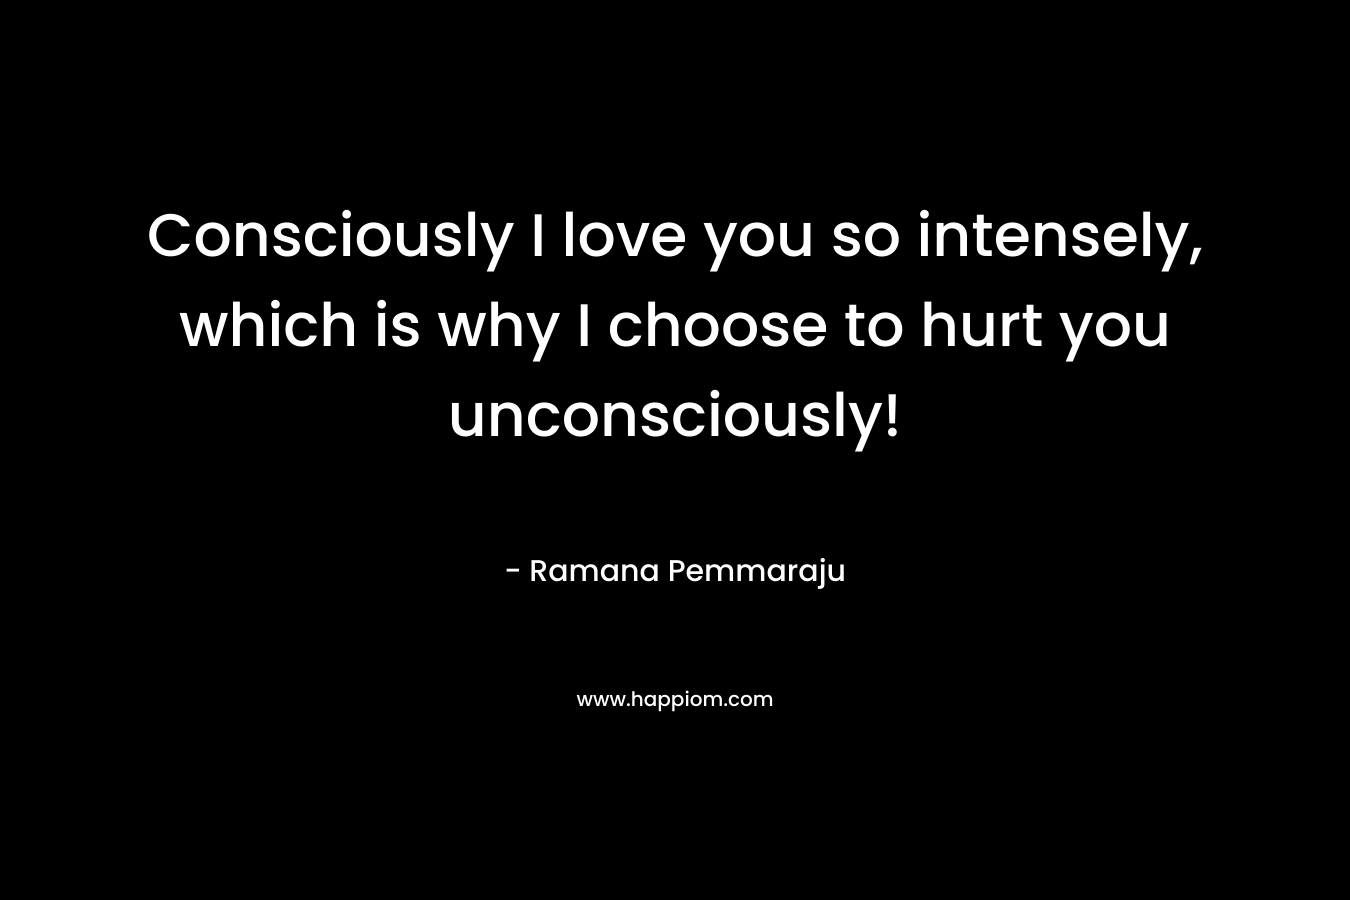 Consciously I love you so intensely, which is why I choose to hurt you unconsciously!